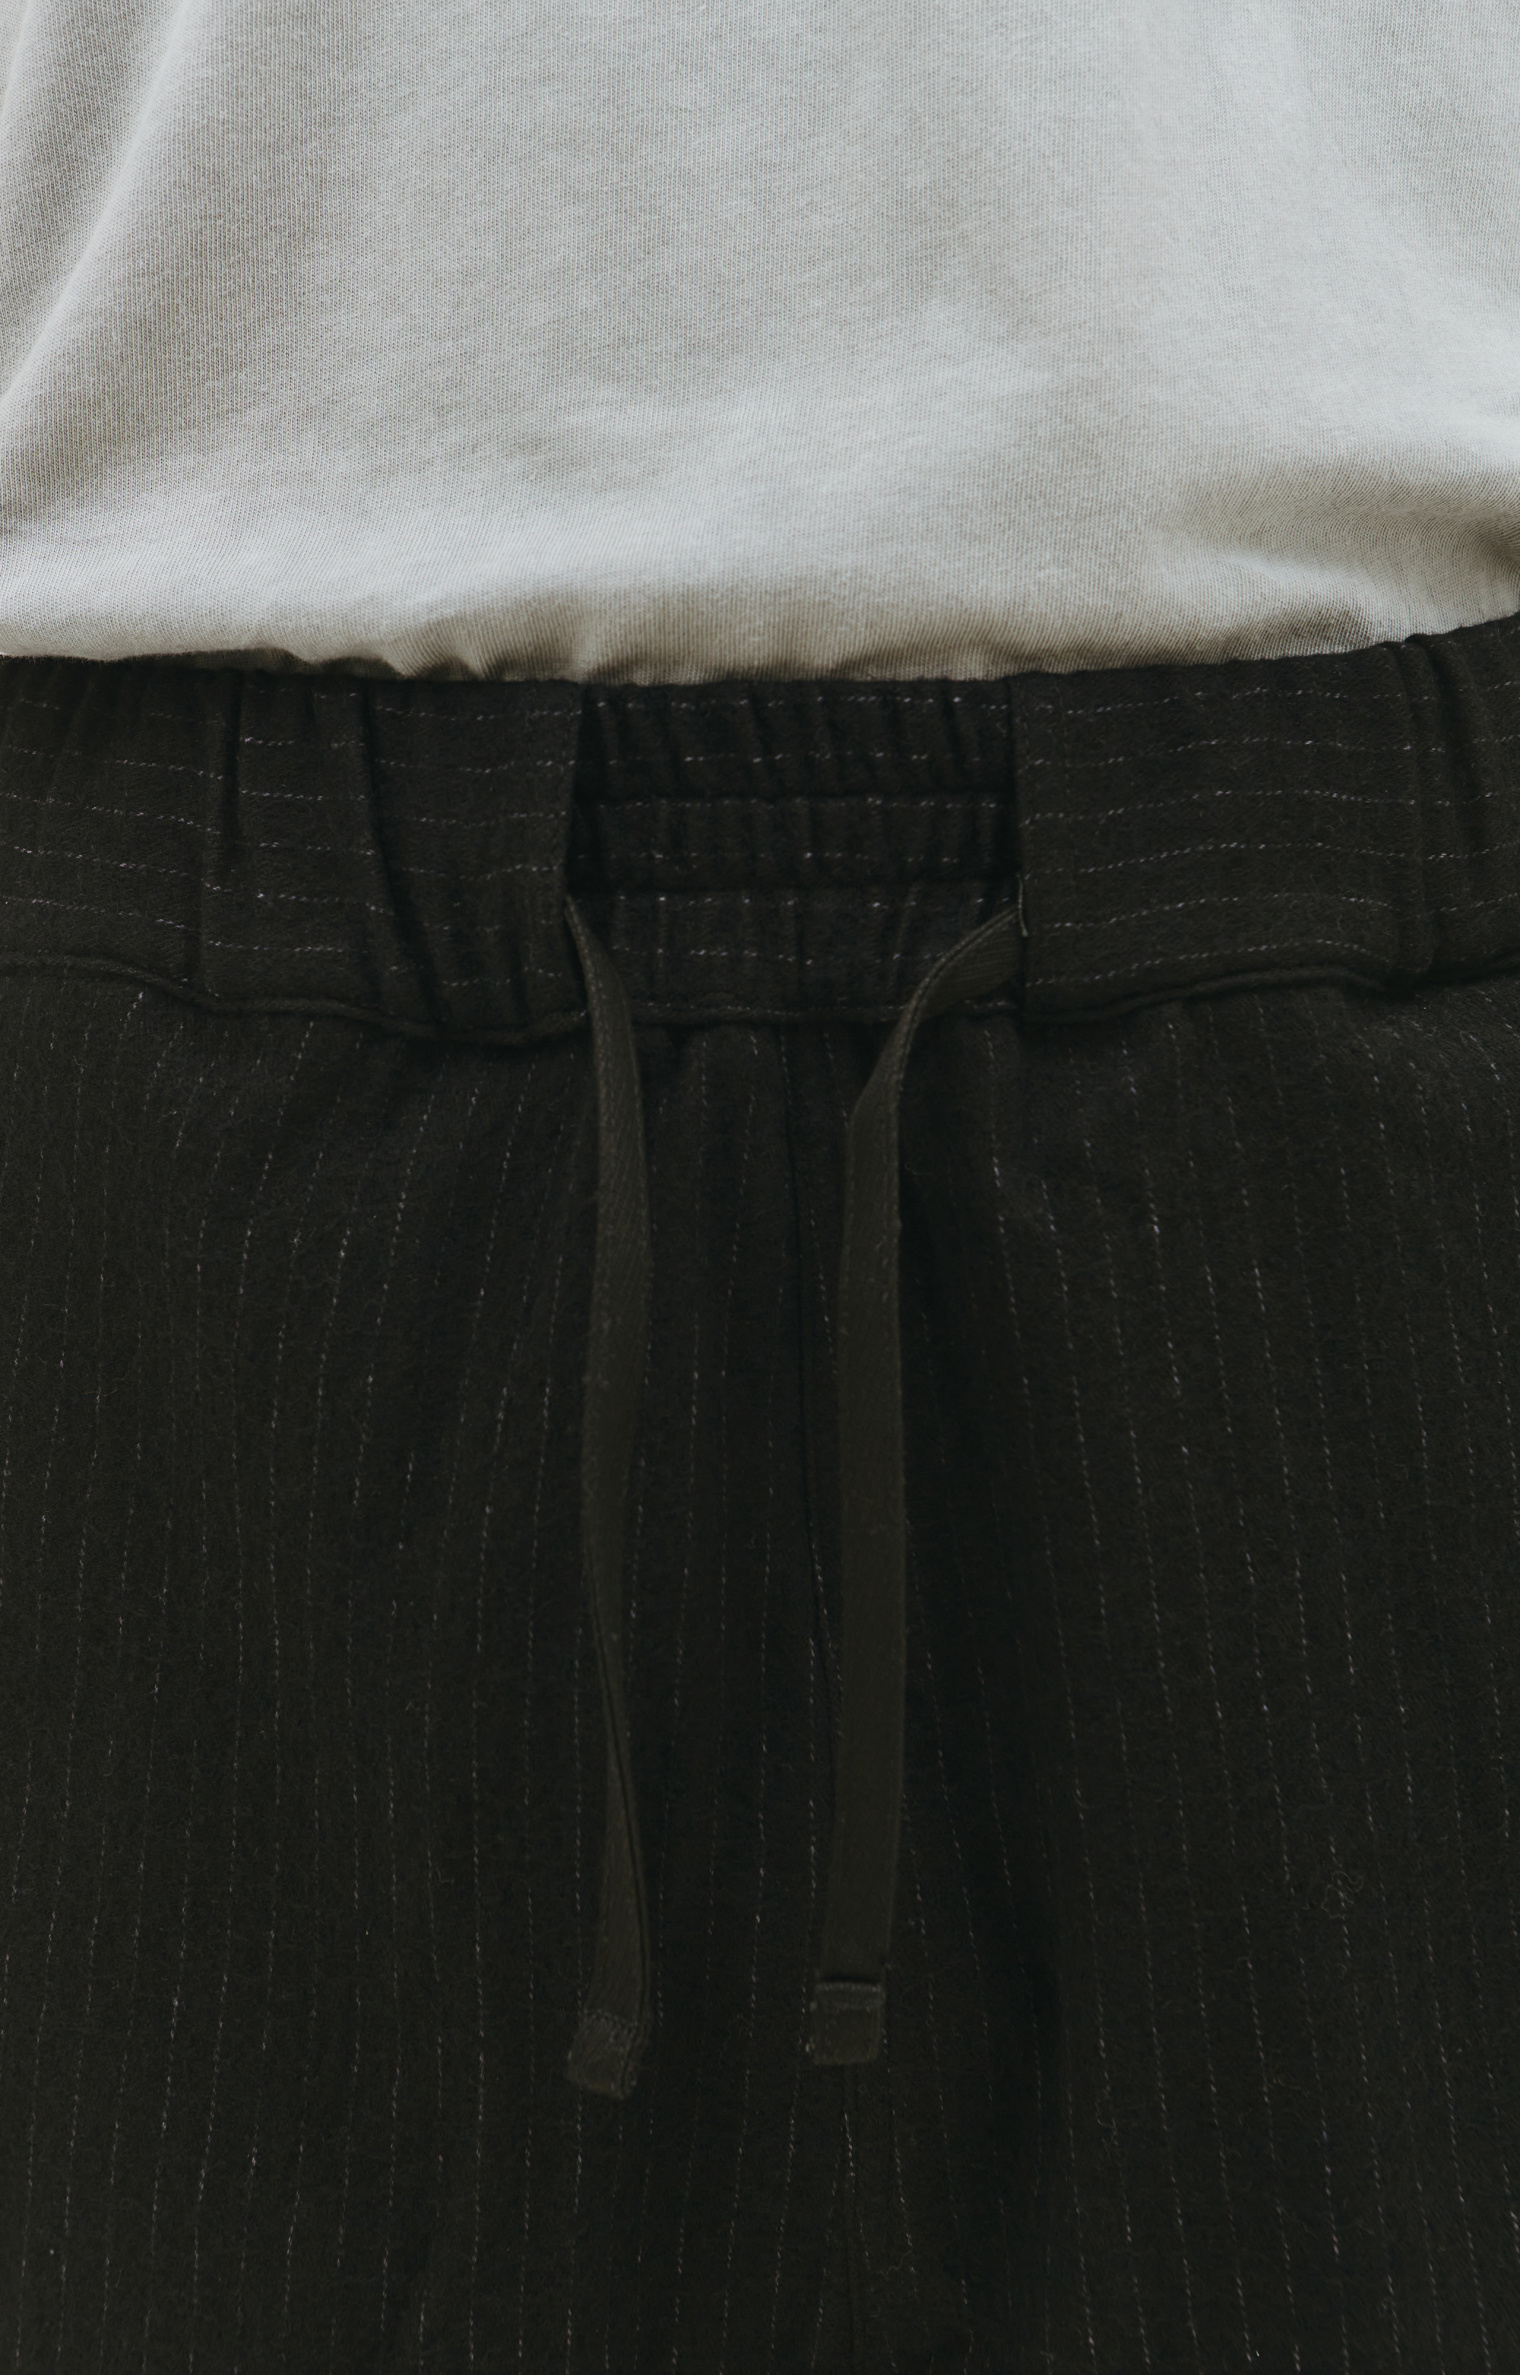 BTFL Wool and cotton trousers